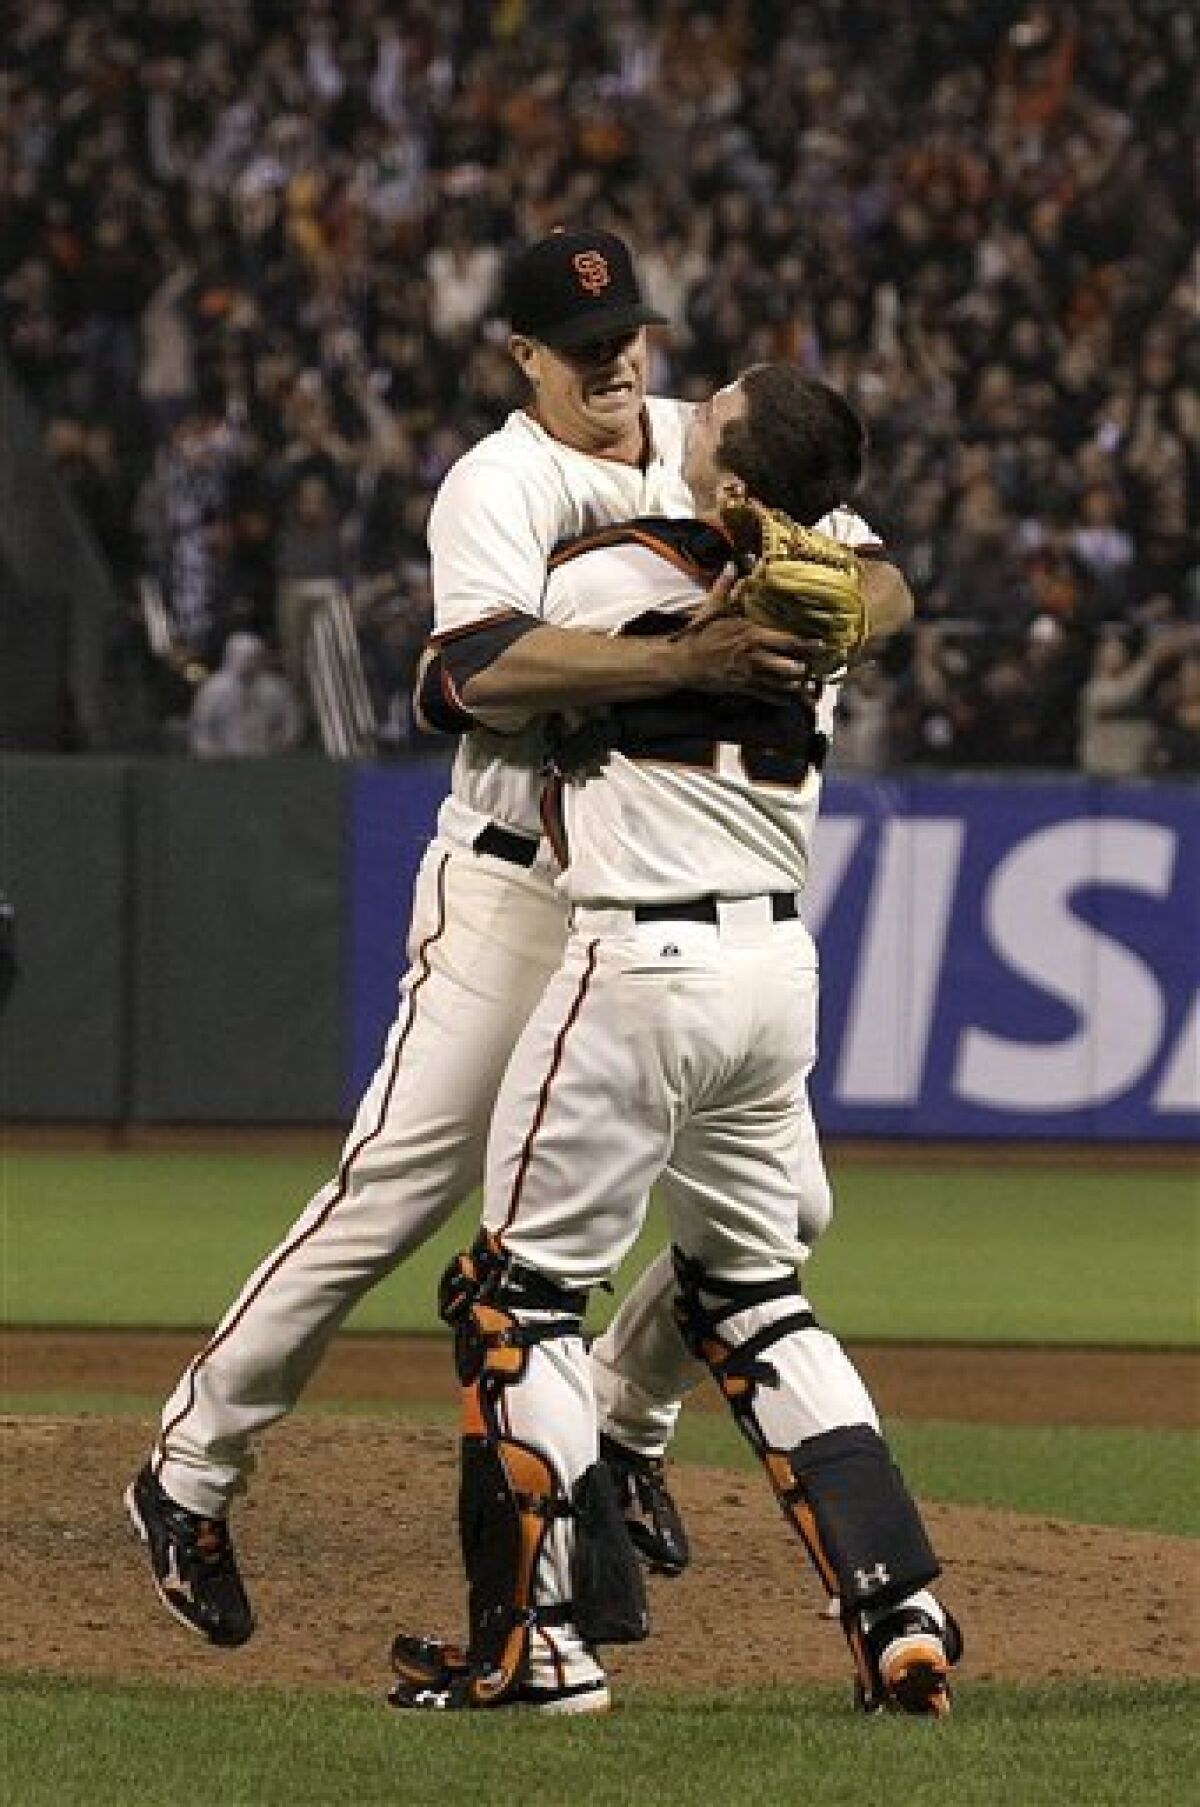 San Francisco Giants pitcher Matt Cain, left, celebrates with catcher Buster Posey after the final out of the ninth inning of a baseball game against the Houston Astros in San Francisco, Wednesday, June 13, 2012. Cain pitched the 22nd perfect game in major league history and first for the Giants, striking out a career-high 14 and getting help from two spectacular catches to beat the Houston Astros 10-0. (AP Photo/Jeff Chiu)